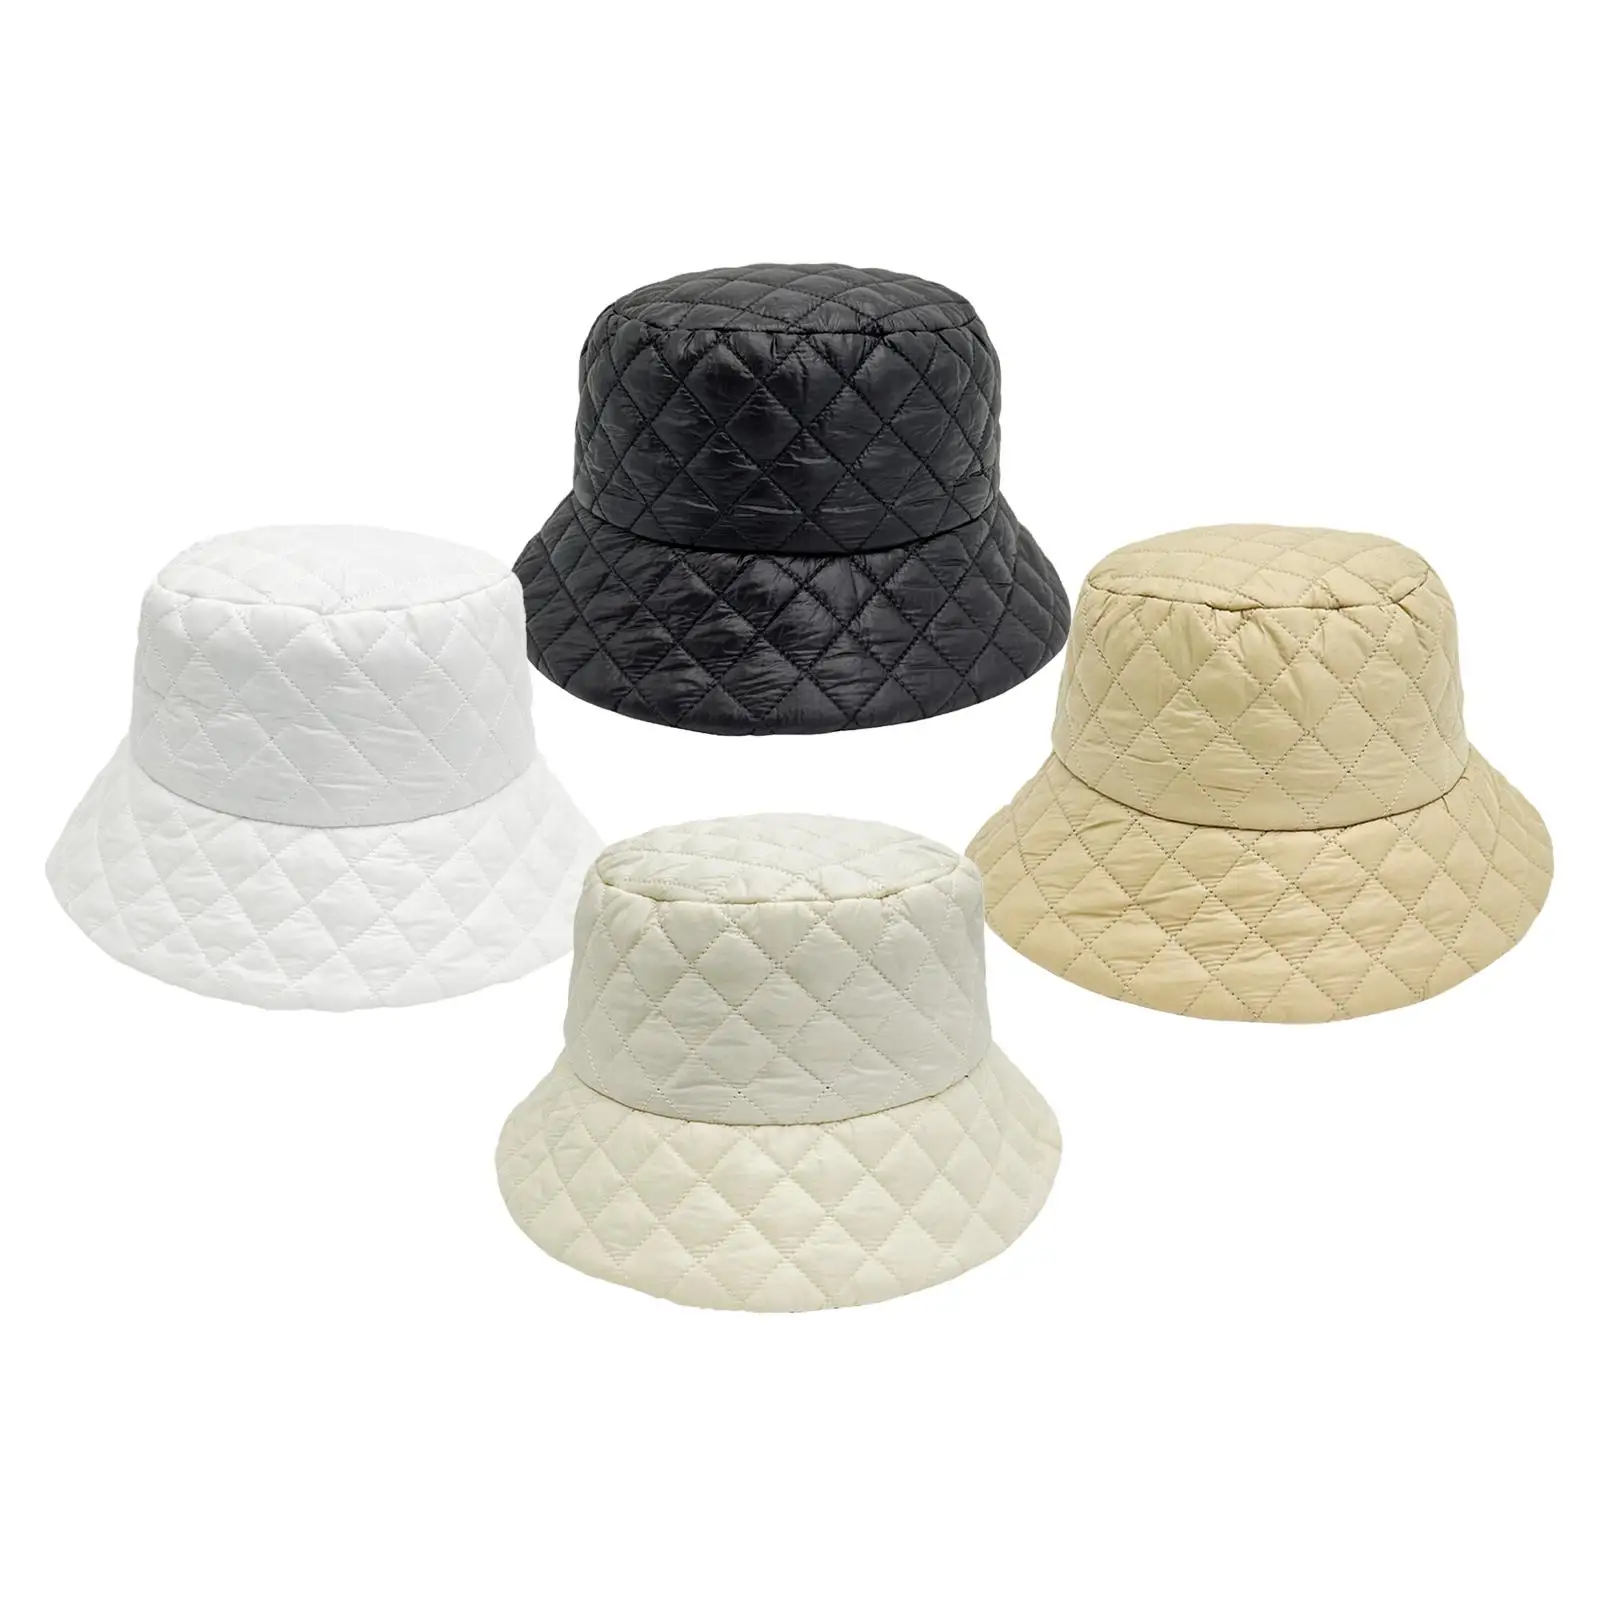 Winter Bucket Hat Soft Comfortable Stylish Thick Down Cotton Quilted Fisherman Cap Fisherman Hat for Men Women Girls Adults